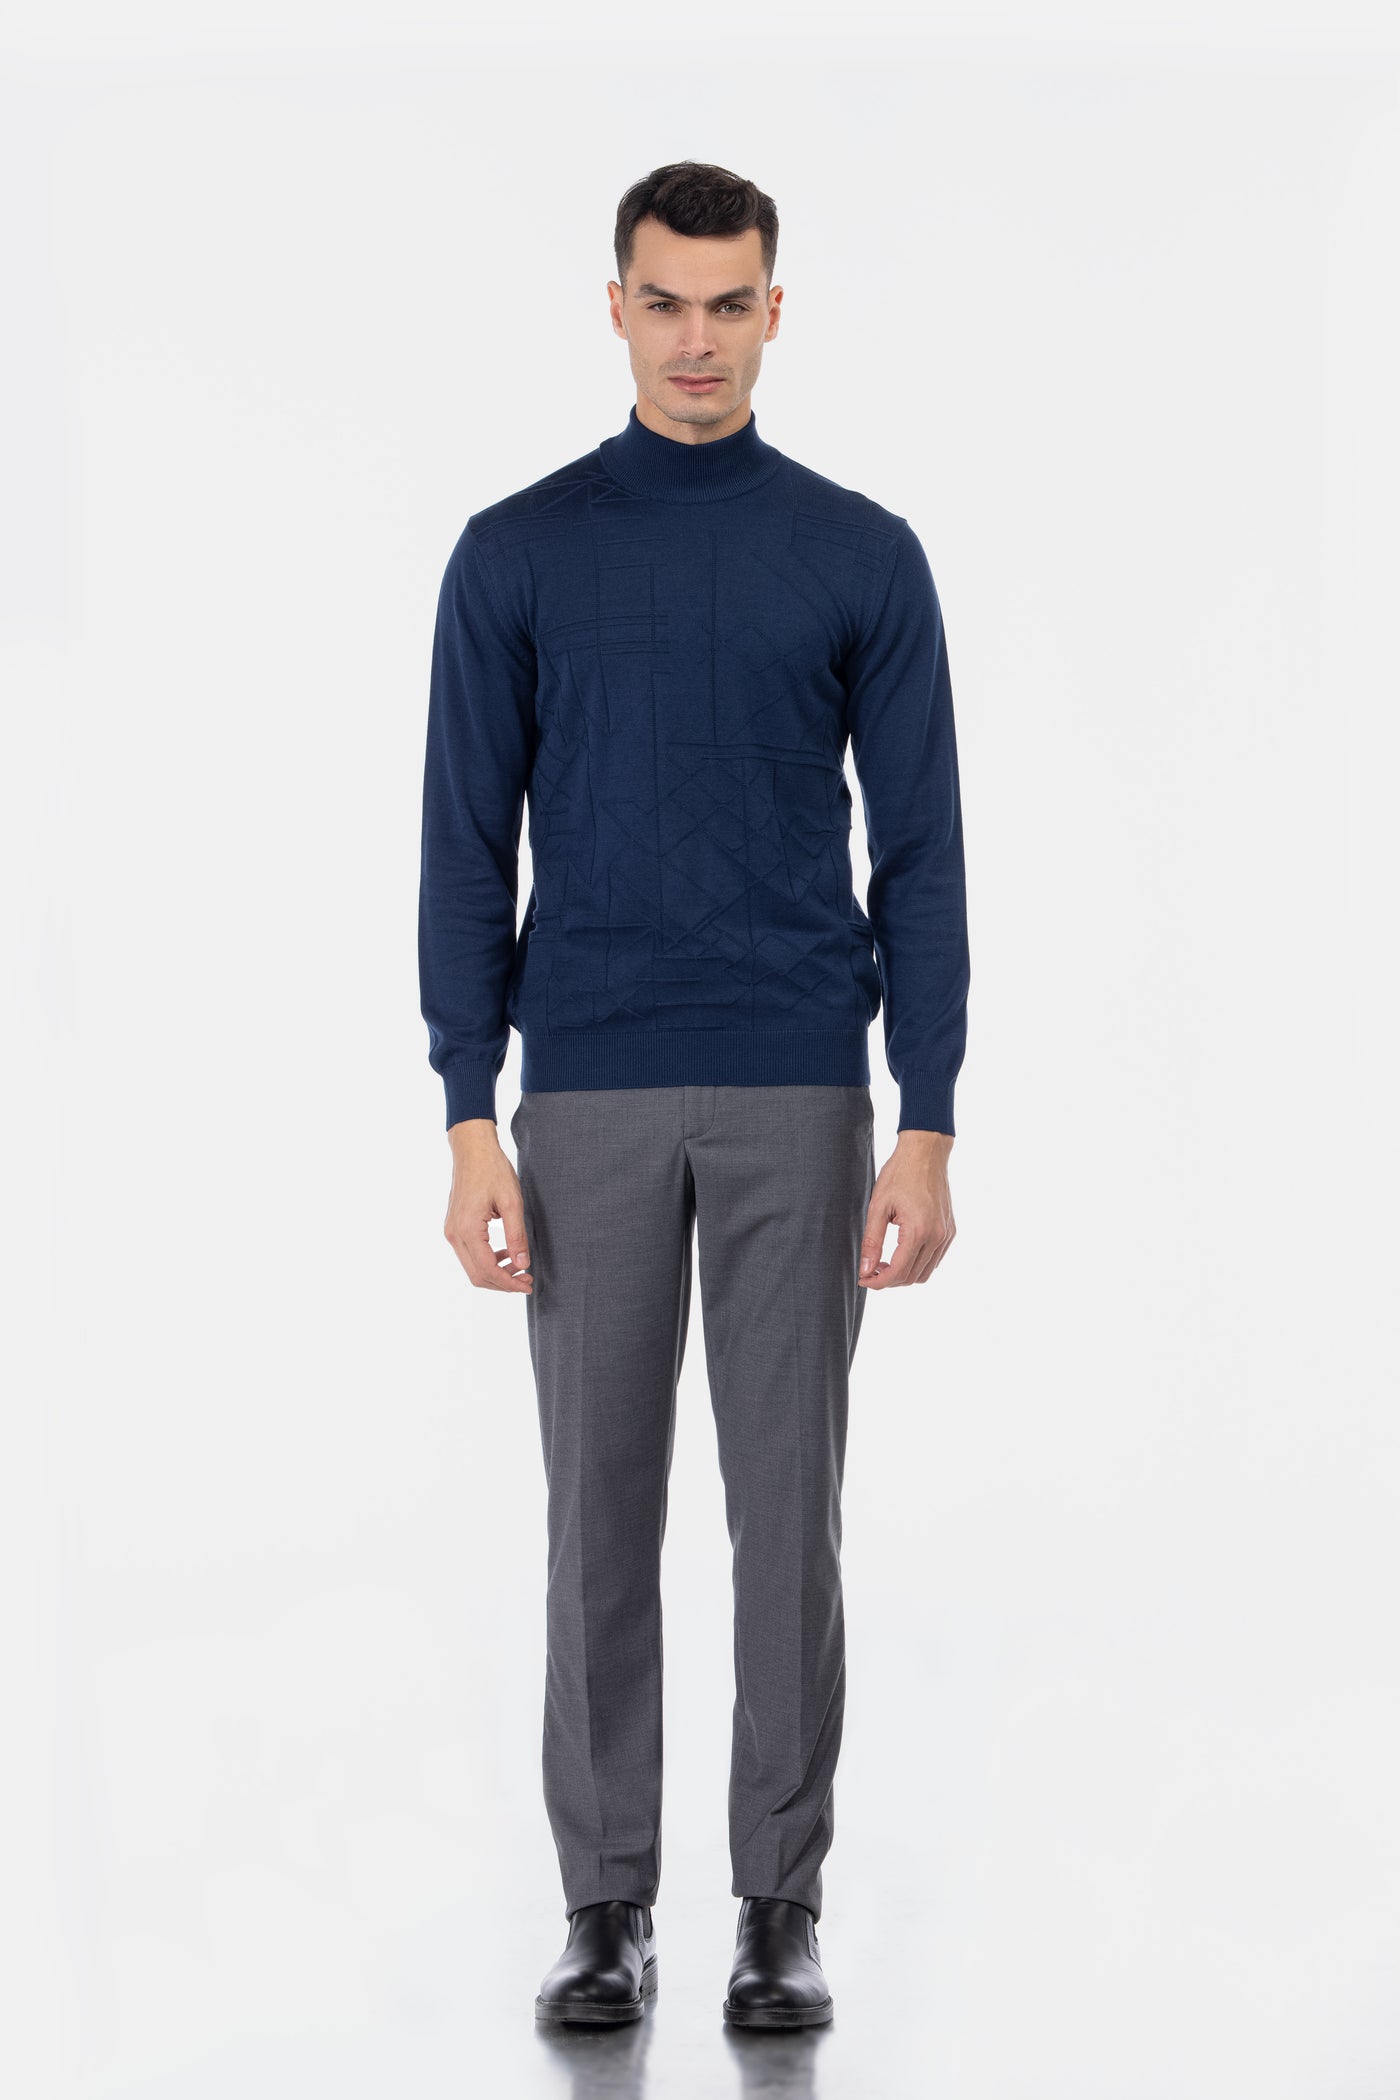 Jacquard Knitted Mock Neck Navy Pullover